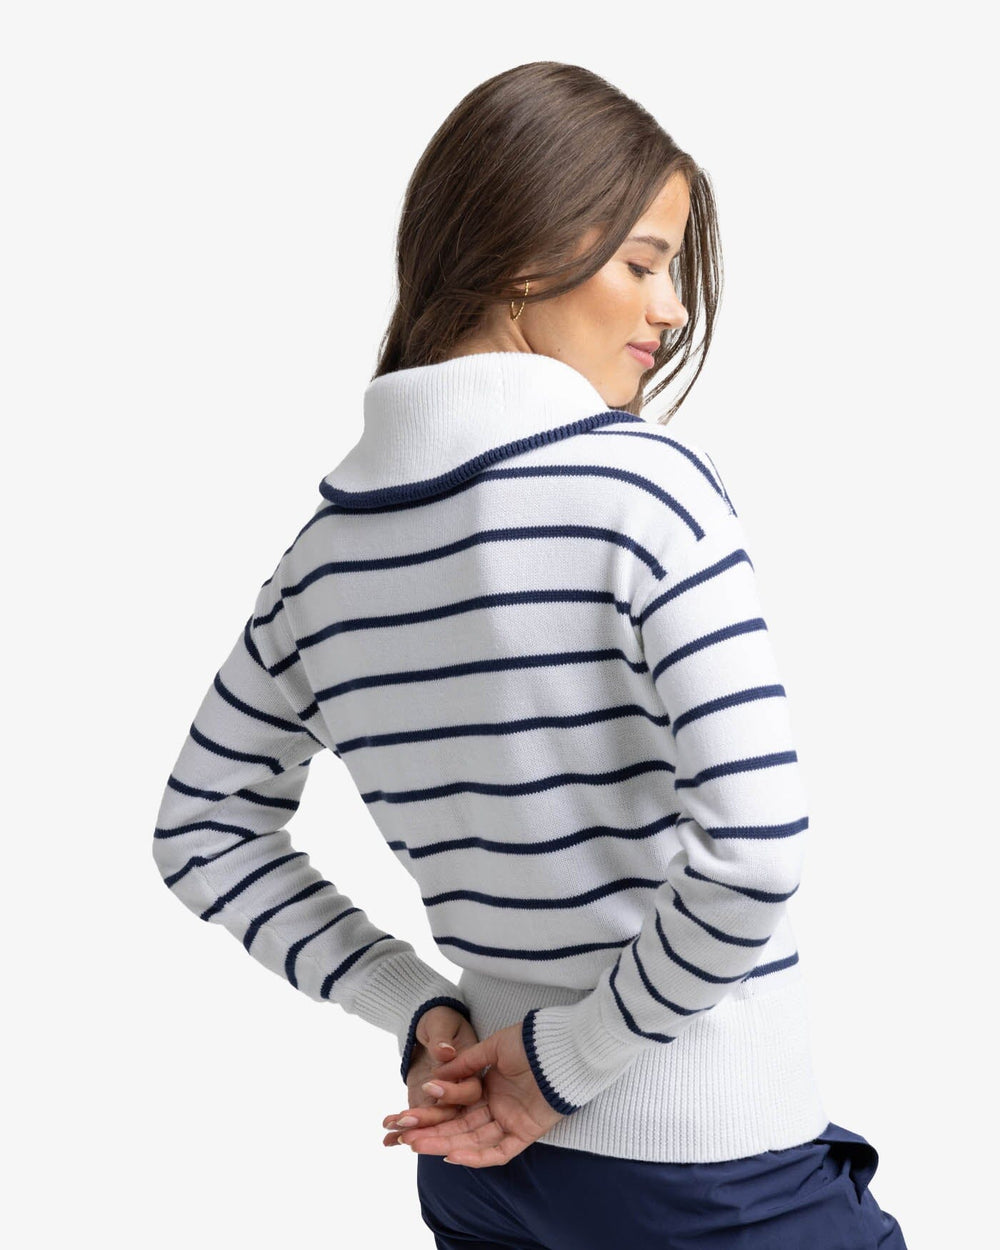 The back view of the Southern Tide Maizy Sweater by Southern Tide - Nautical Navy